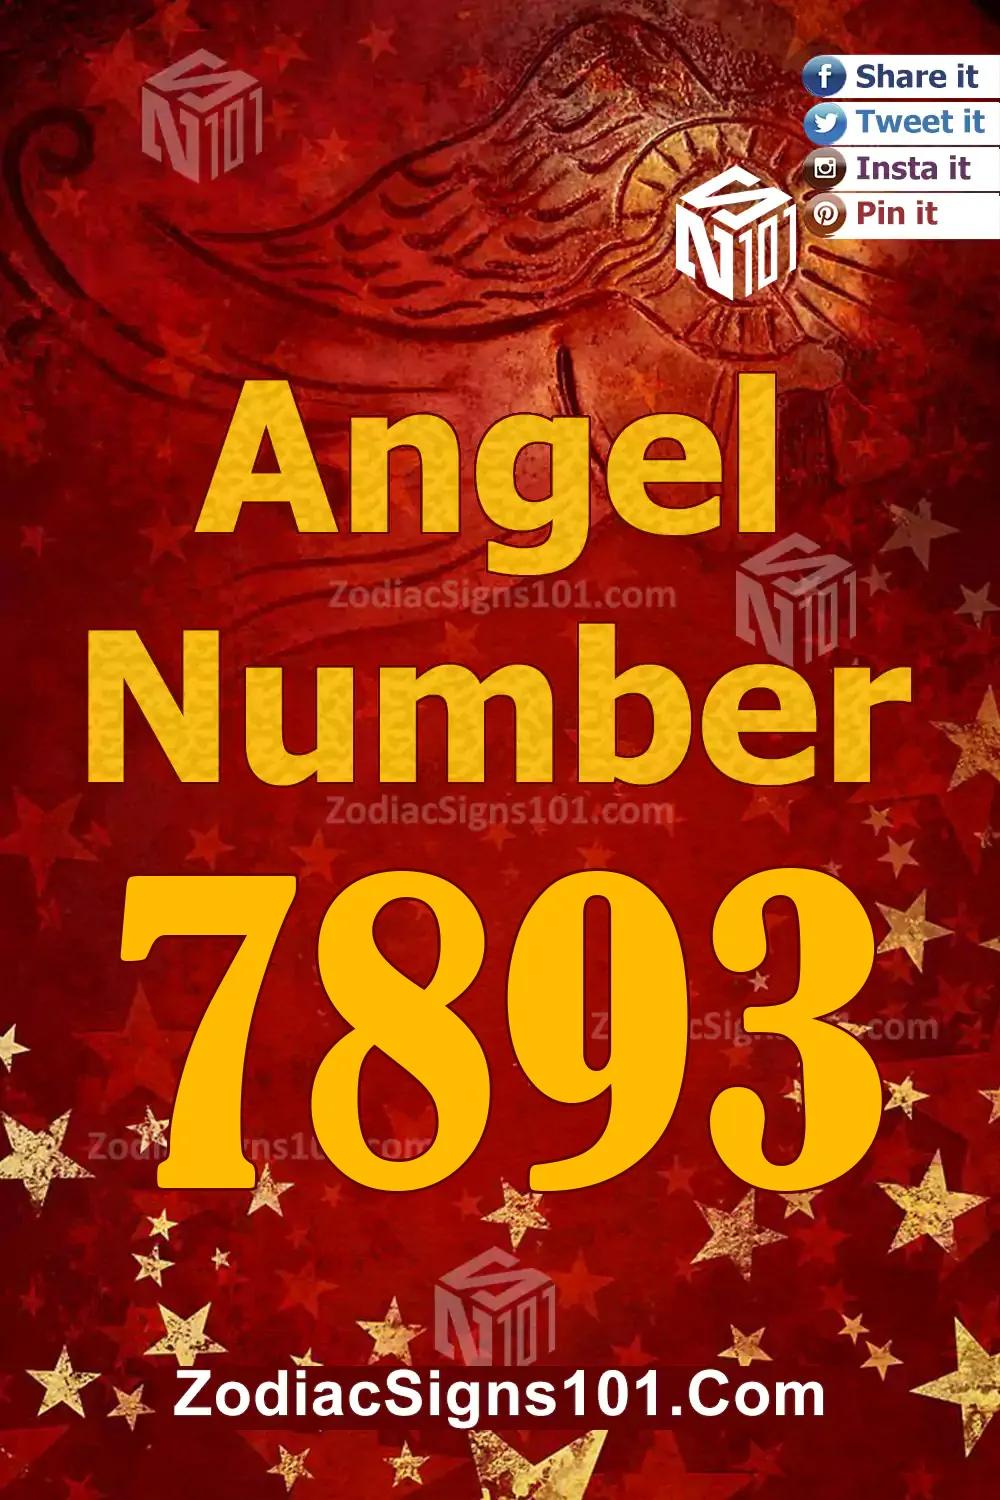 7893 Angel Number Meaning